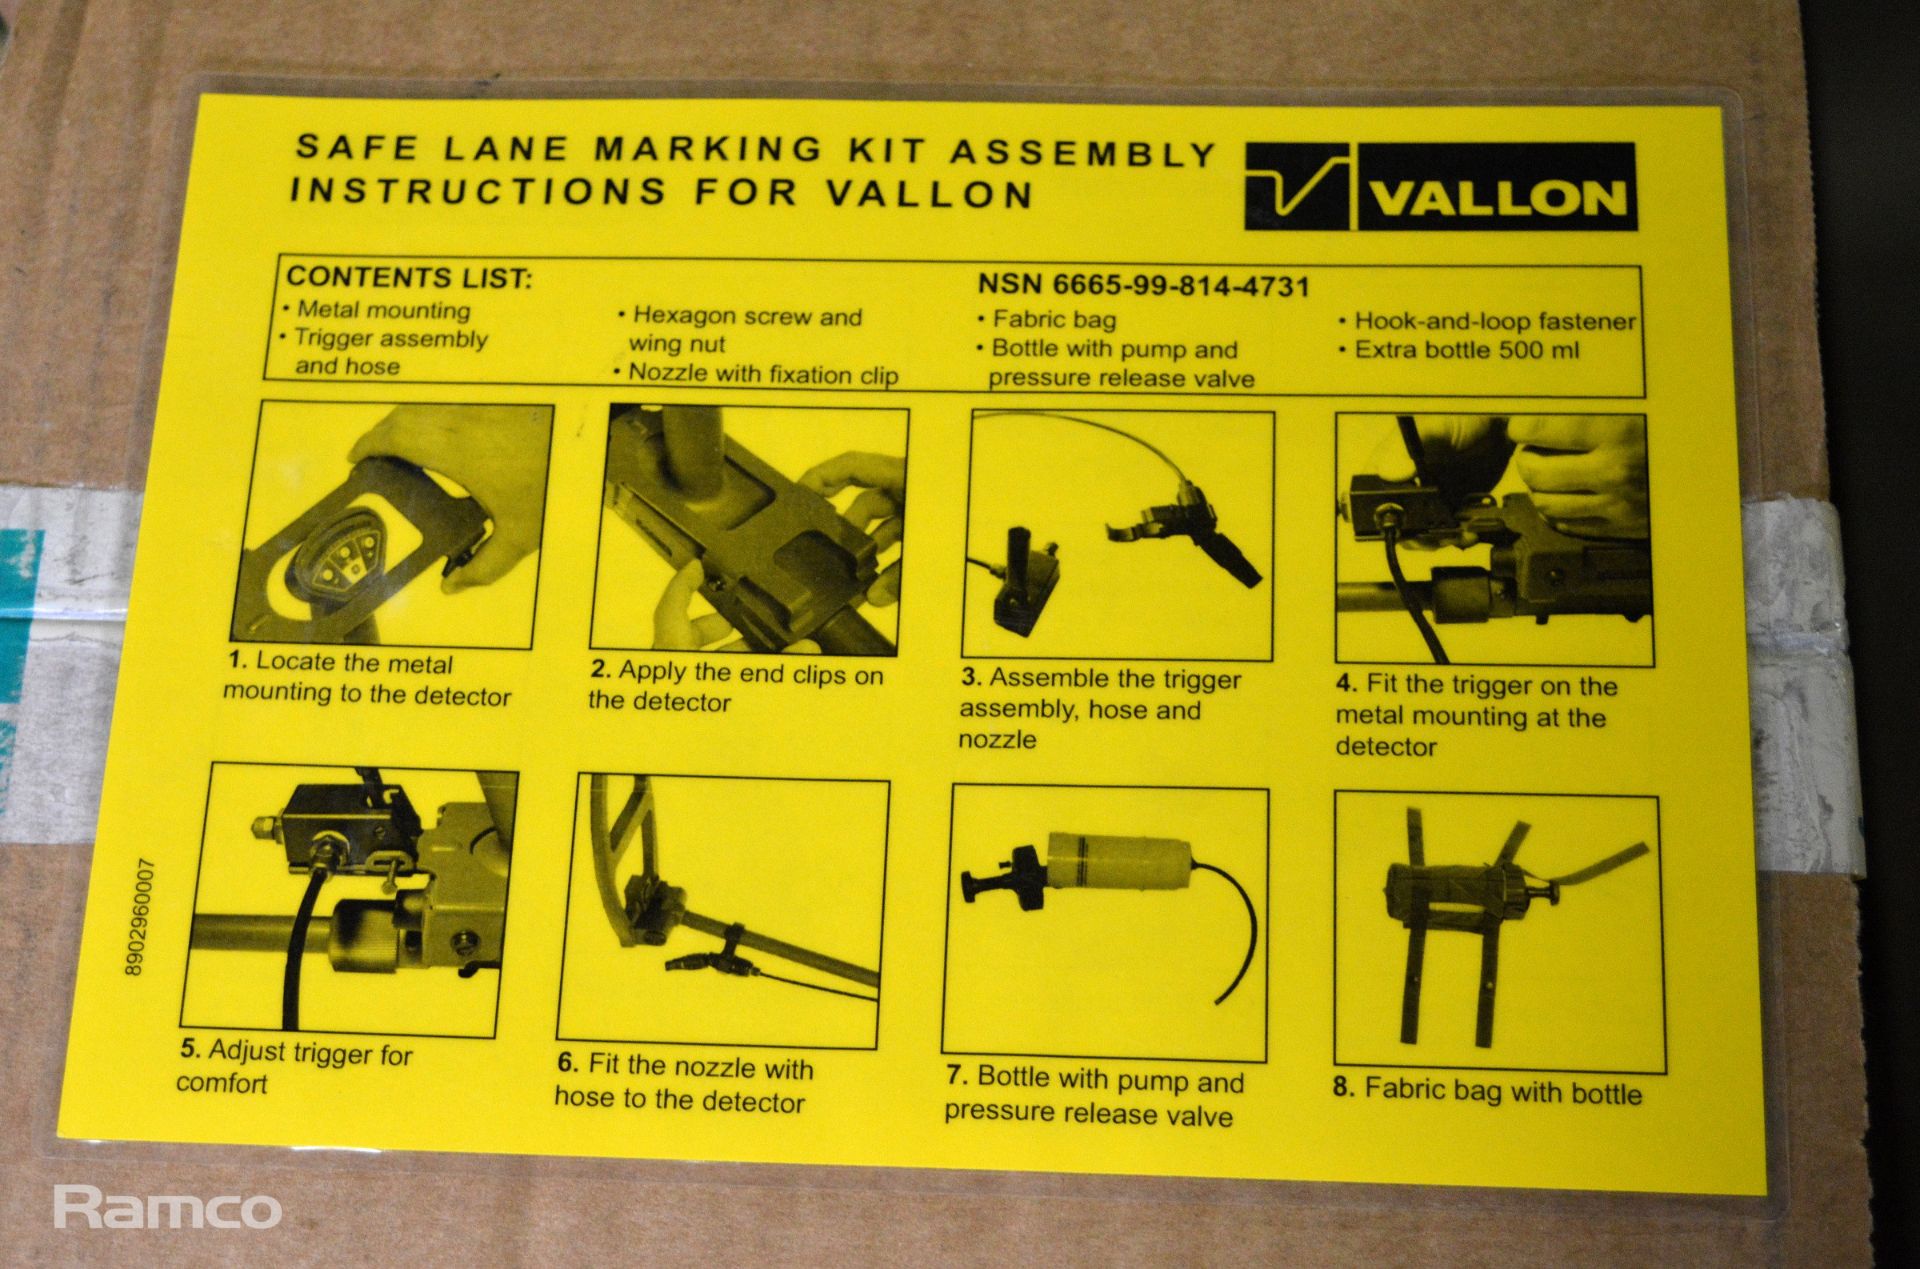 12x Vallon marking kits for use with metal detectors - NSN 9905-12-385-3812 - Image 3 of 5